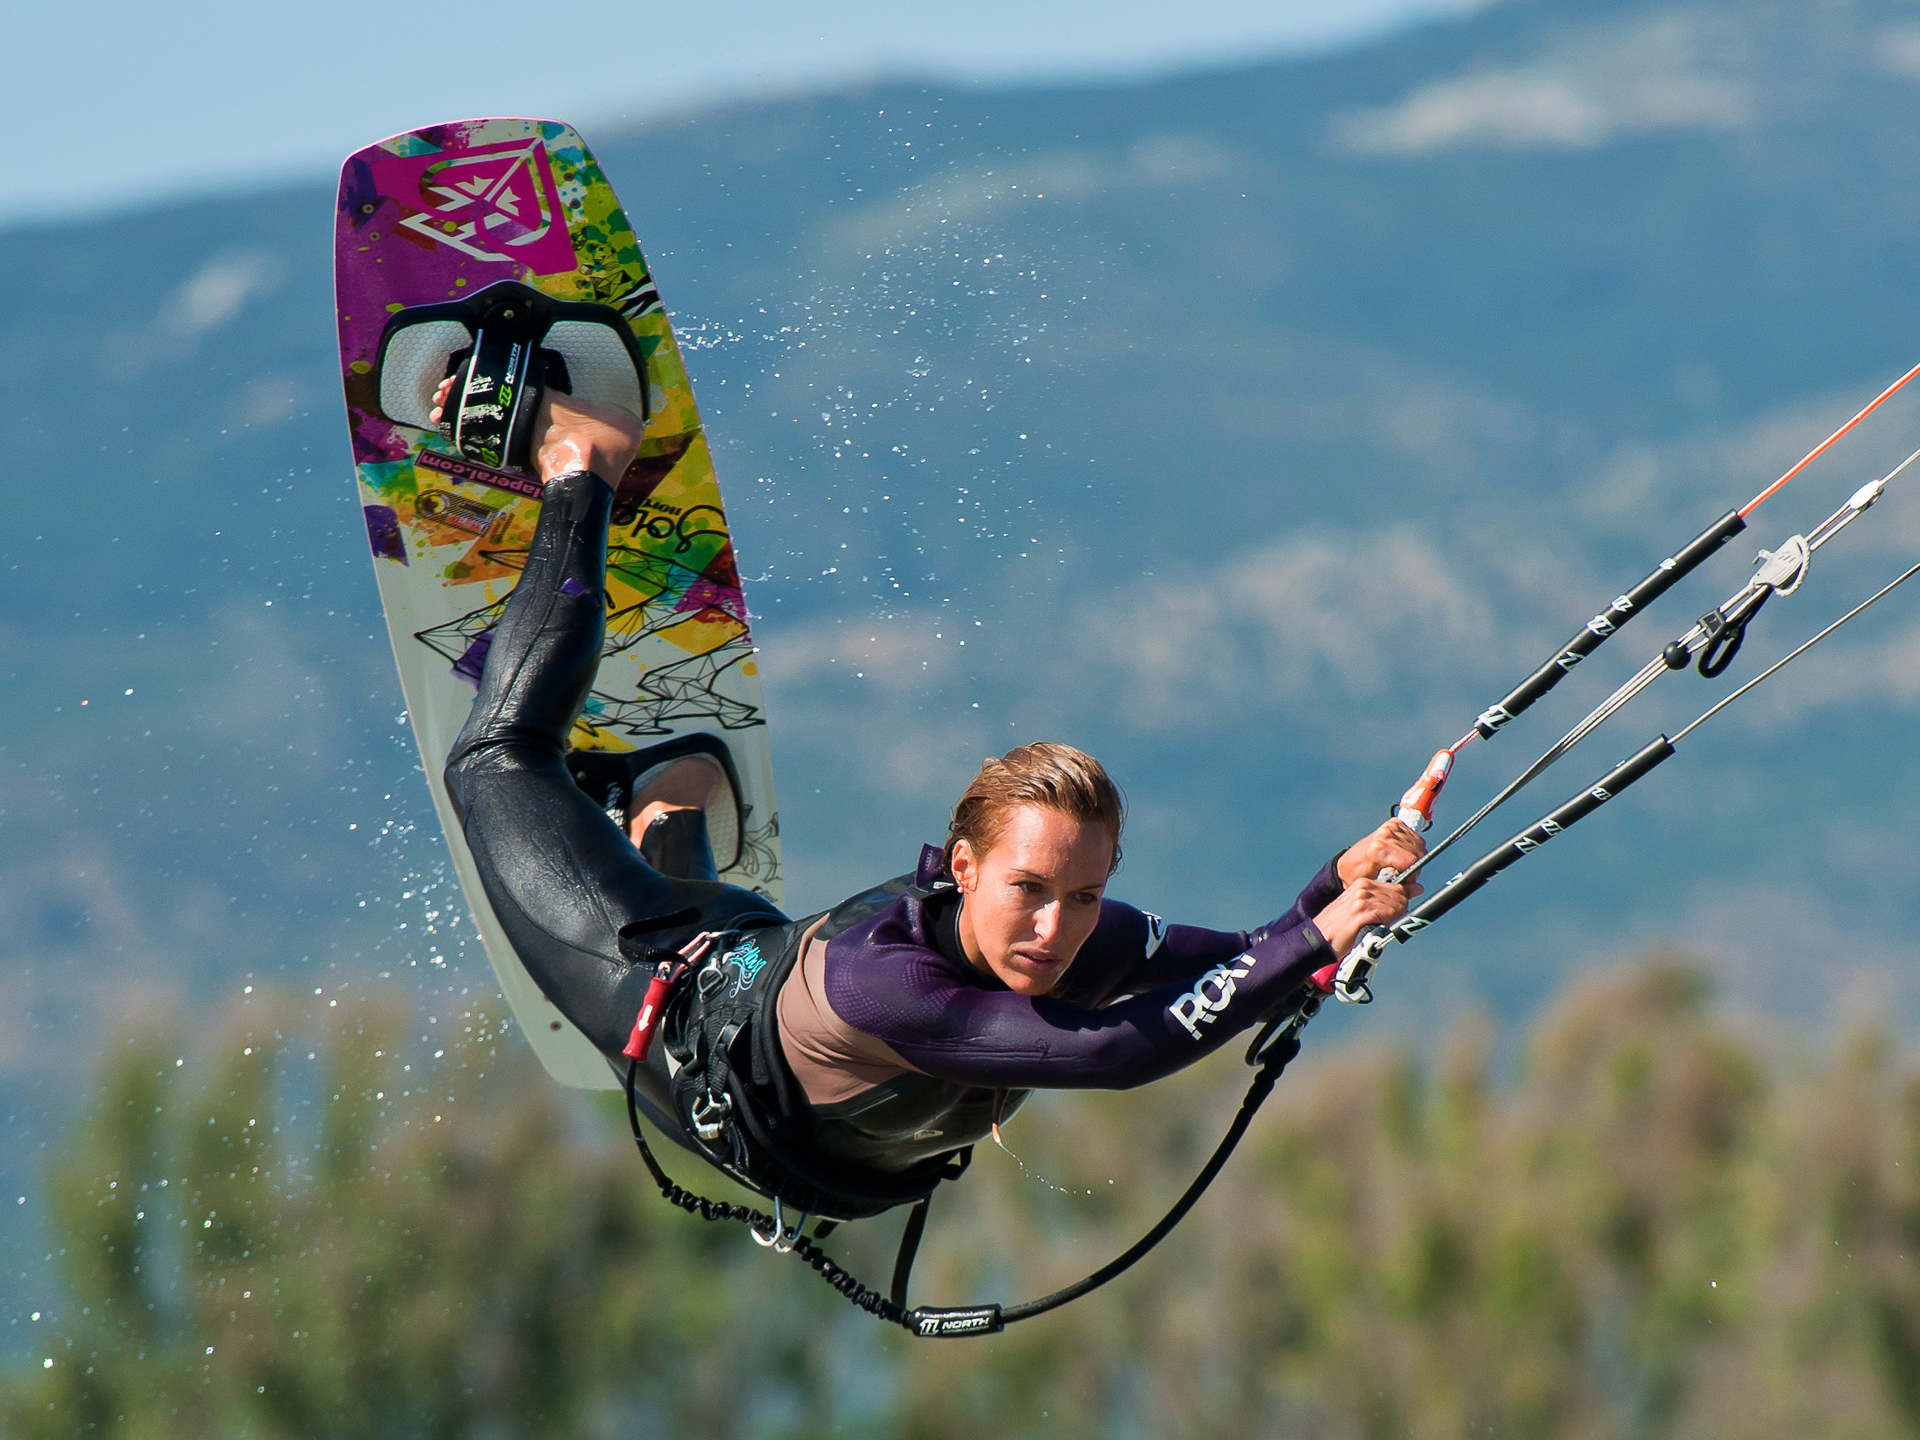 kitesurf wallpaper image - Angela Peral raily into town - in resolution: Standard 4:3 1920 X 1440